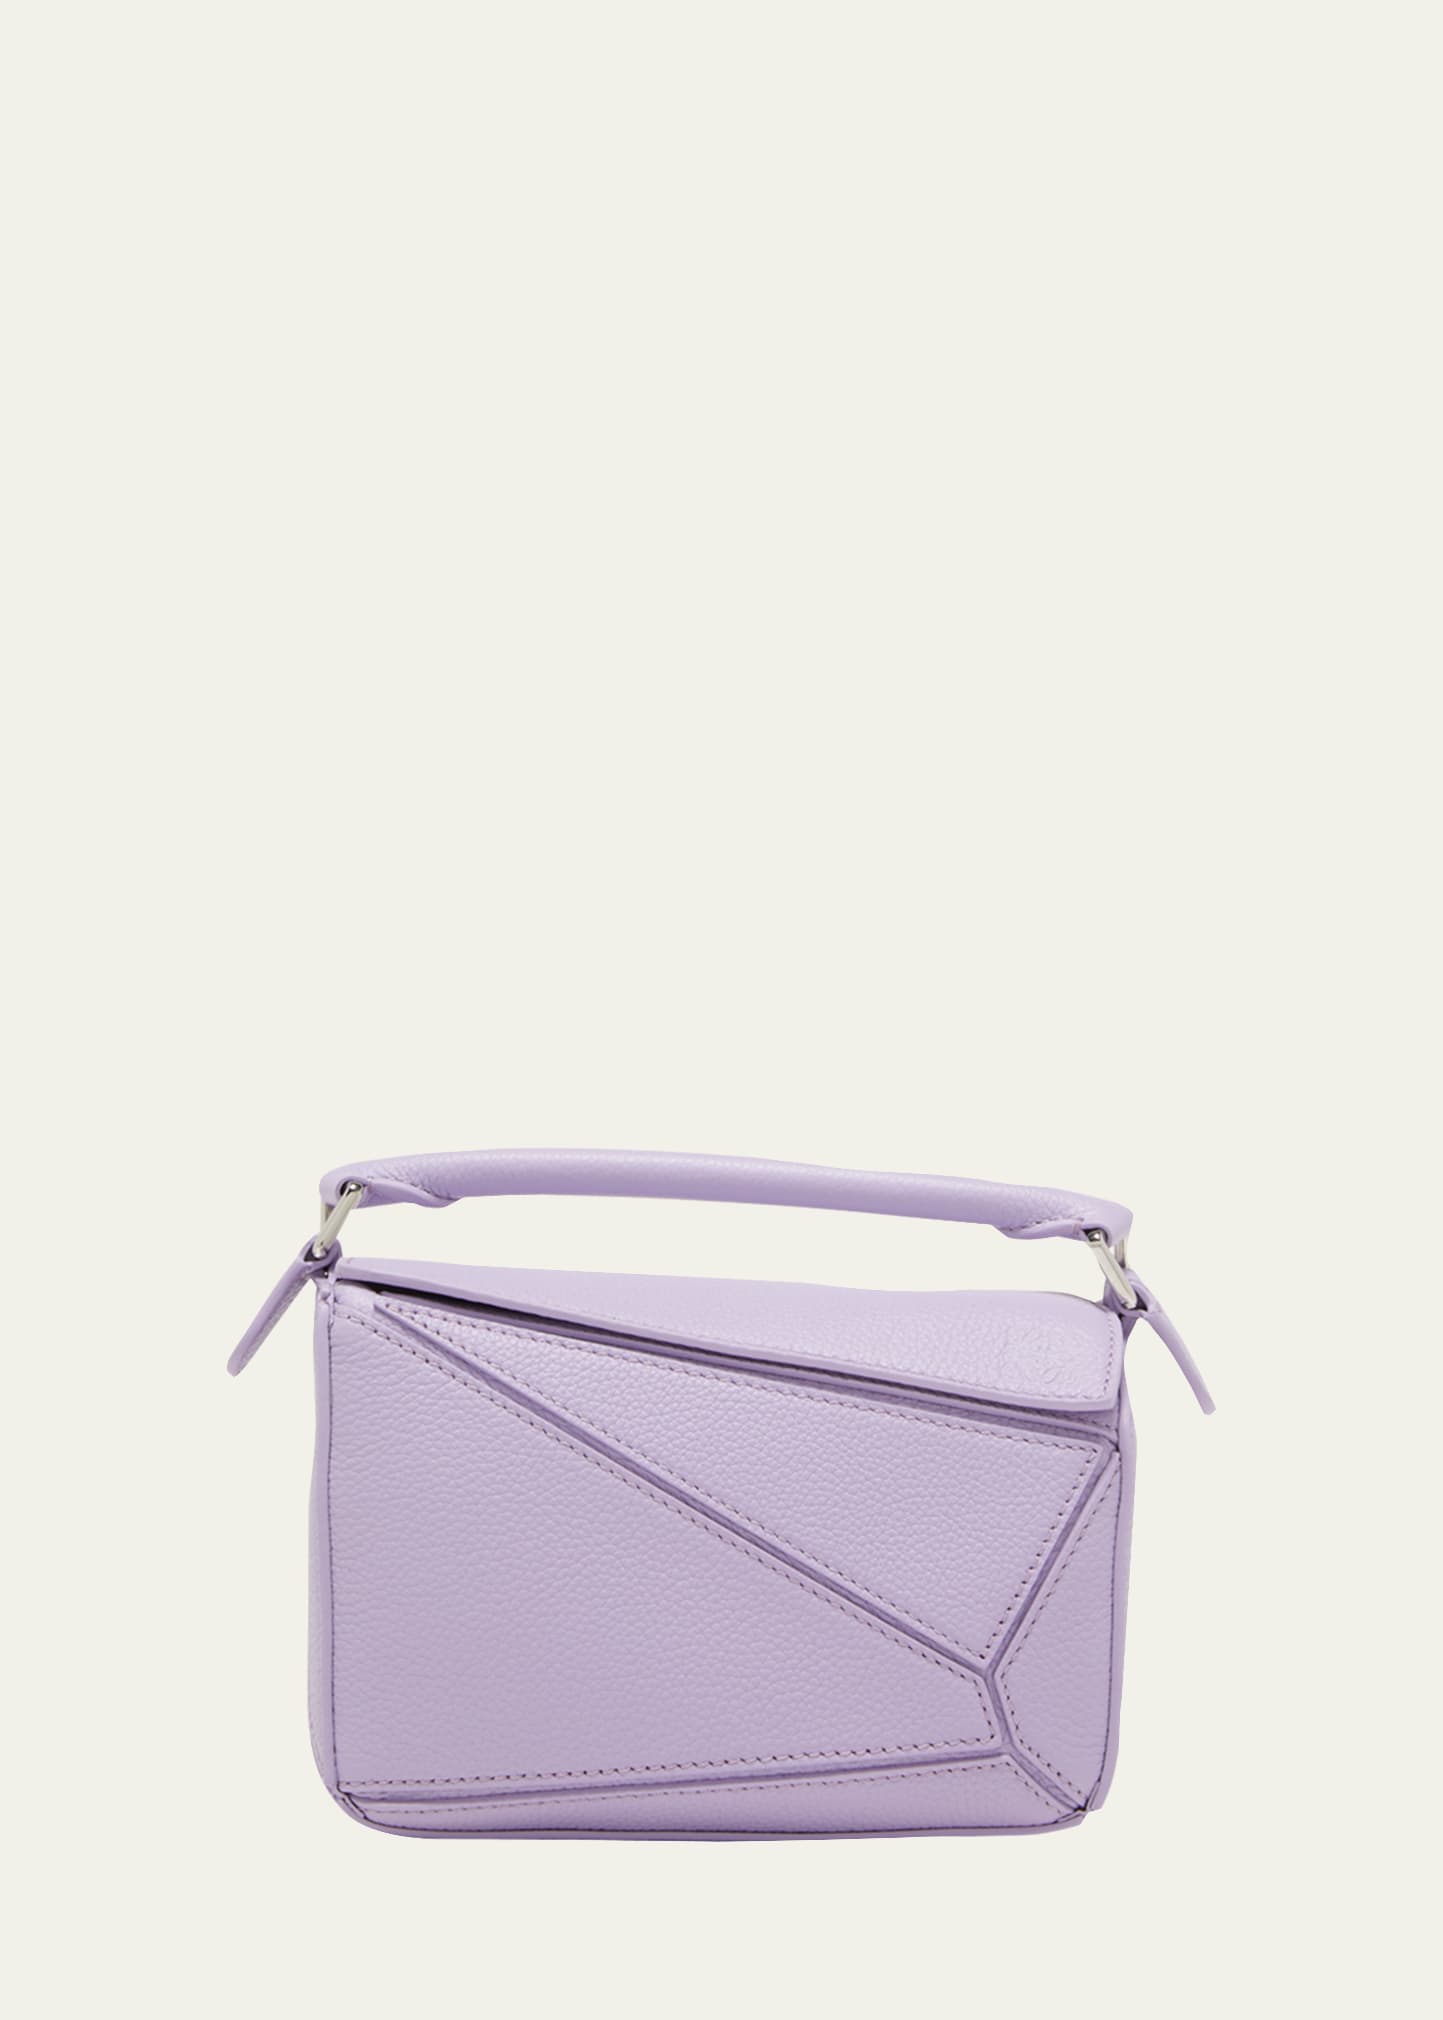 Loewe Puzzle Small Bag in Soft Pink